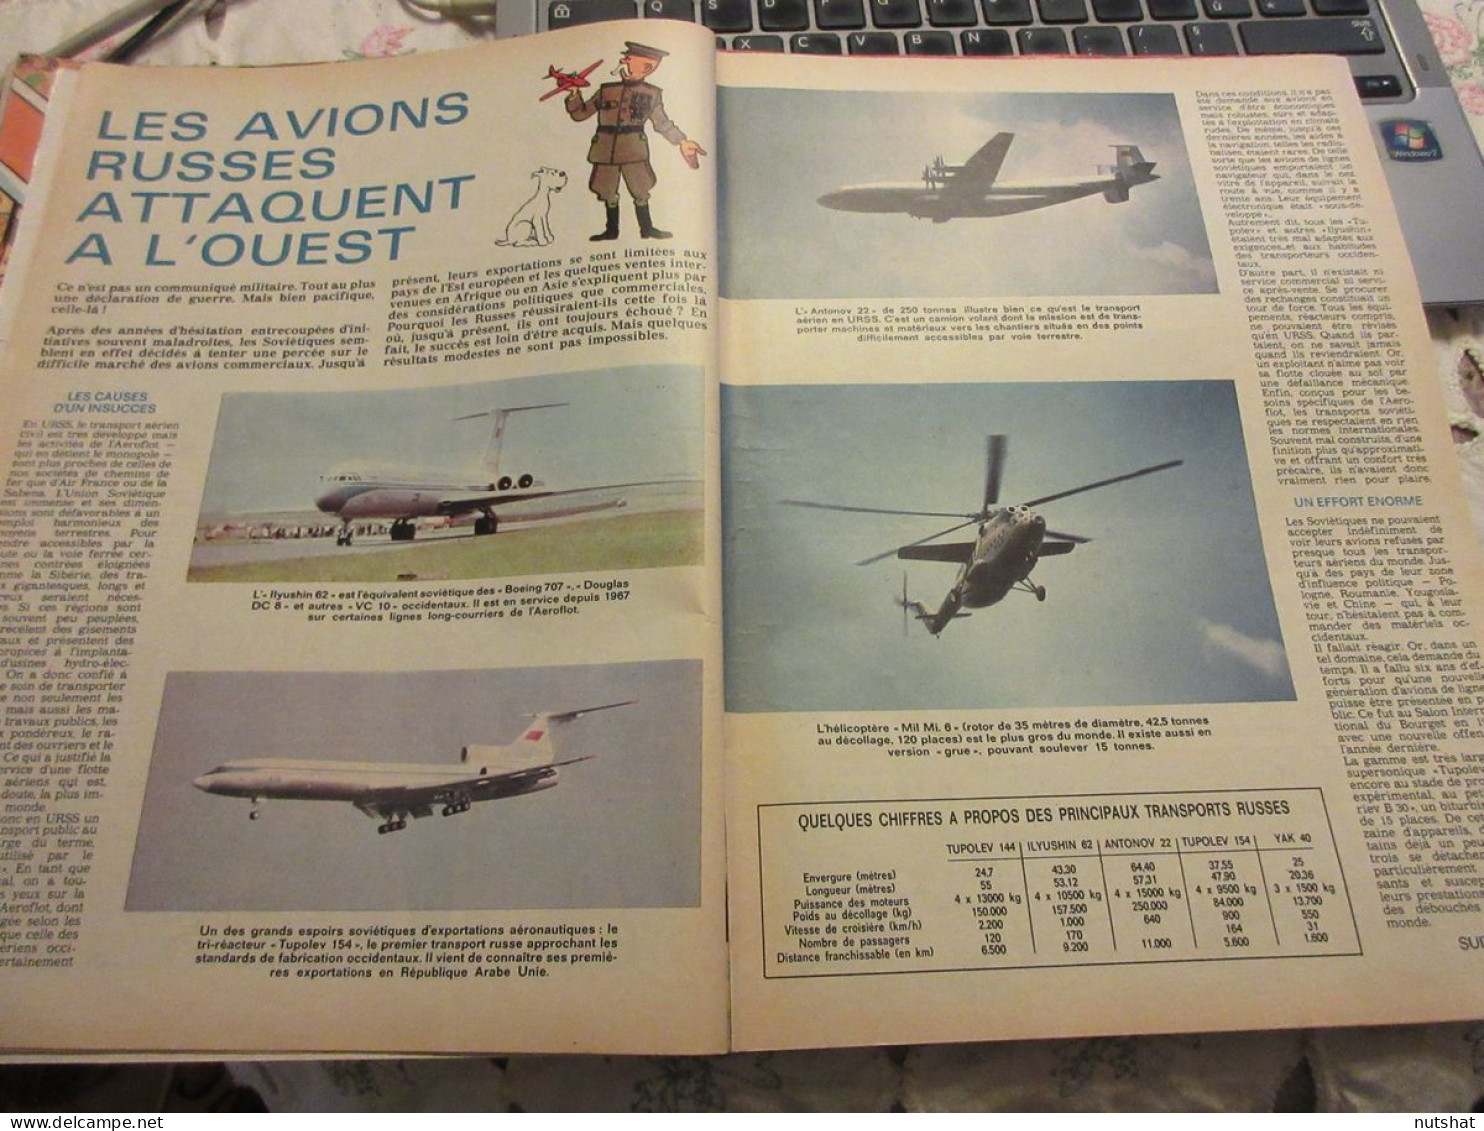 TINTIN 1132 09.07.1970 AVIONS CIVILS RUSSES HISTOIRE COMPLETE Ric HOCHET 8 Pages - Tintin